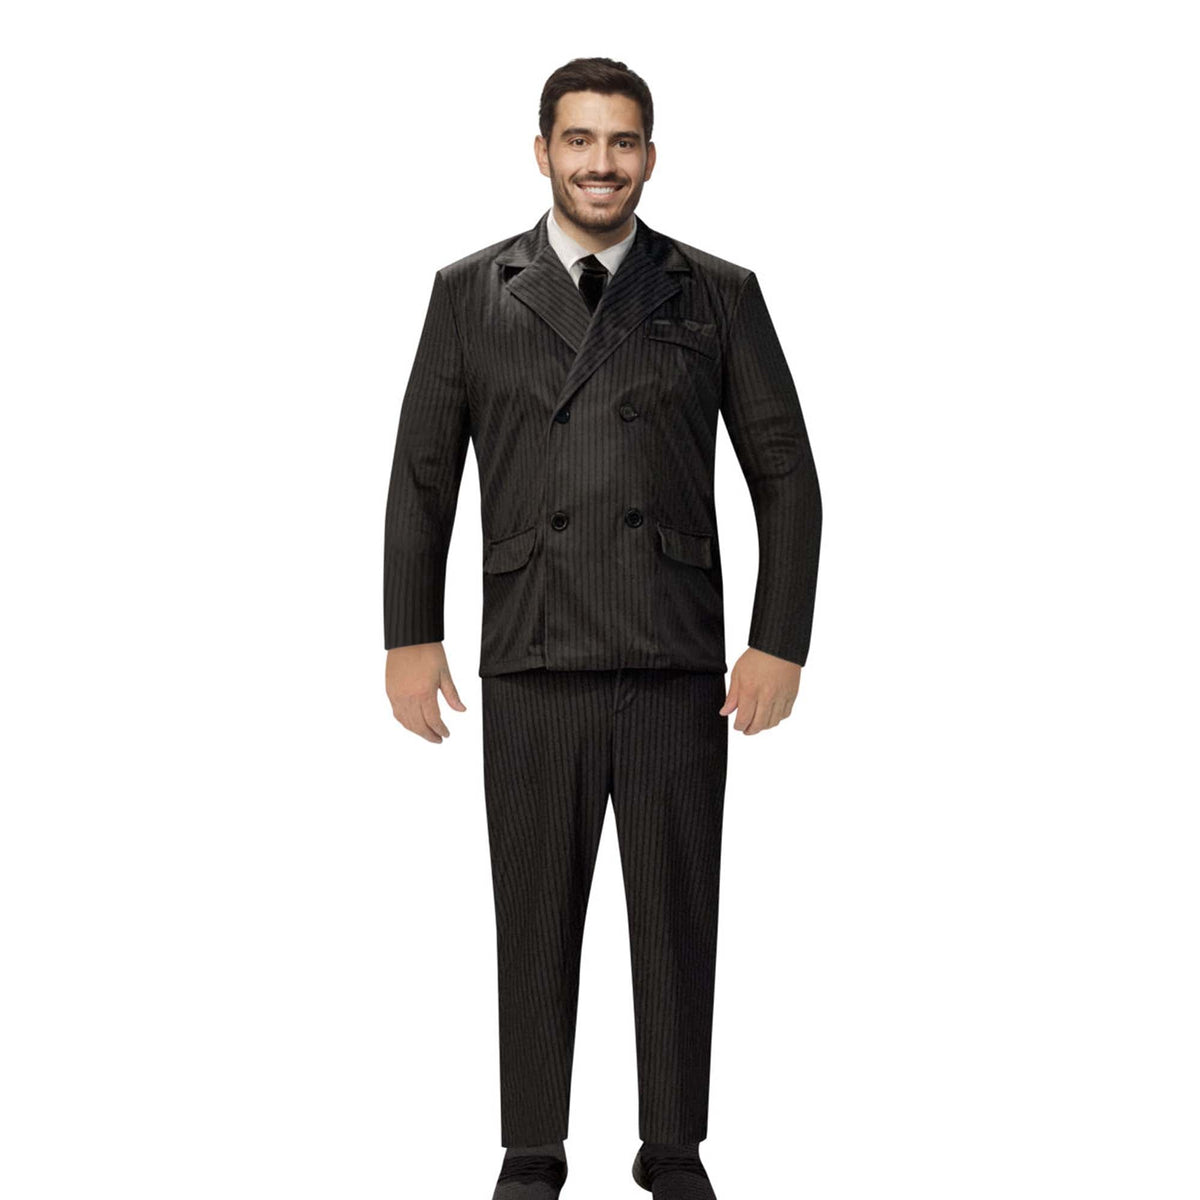 RUBIES II (Ruby Slipper Sales) Costumes Gomez Addams Costume for Adults, Family Addams, Black Jacket